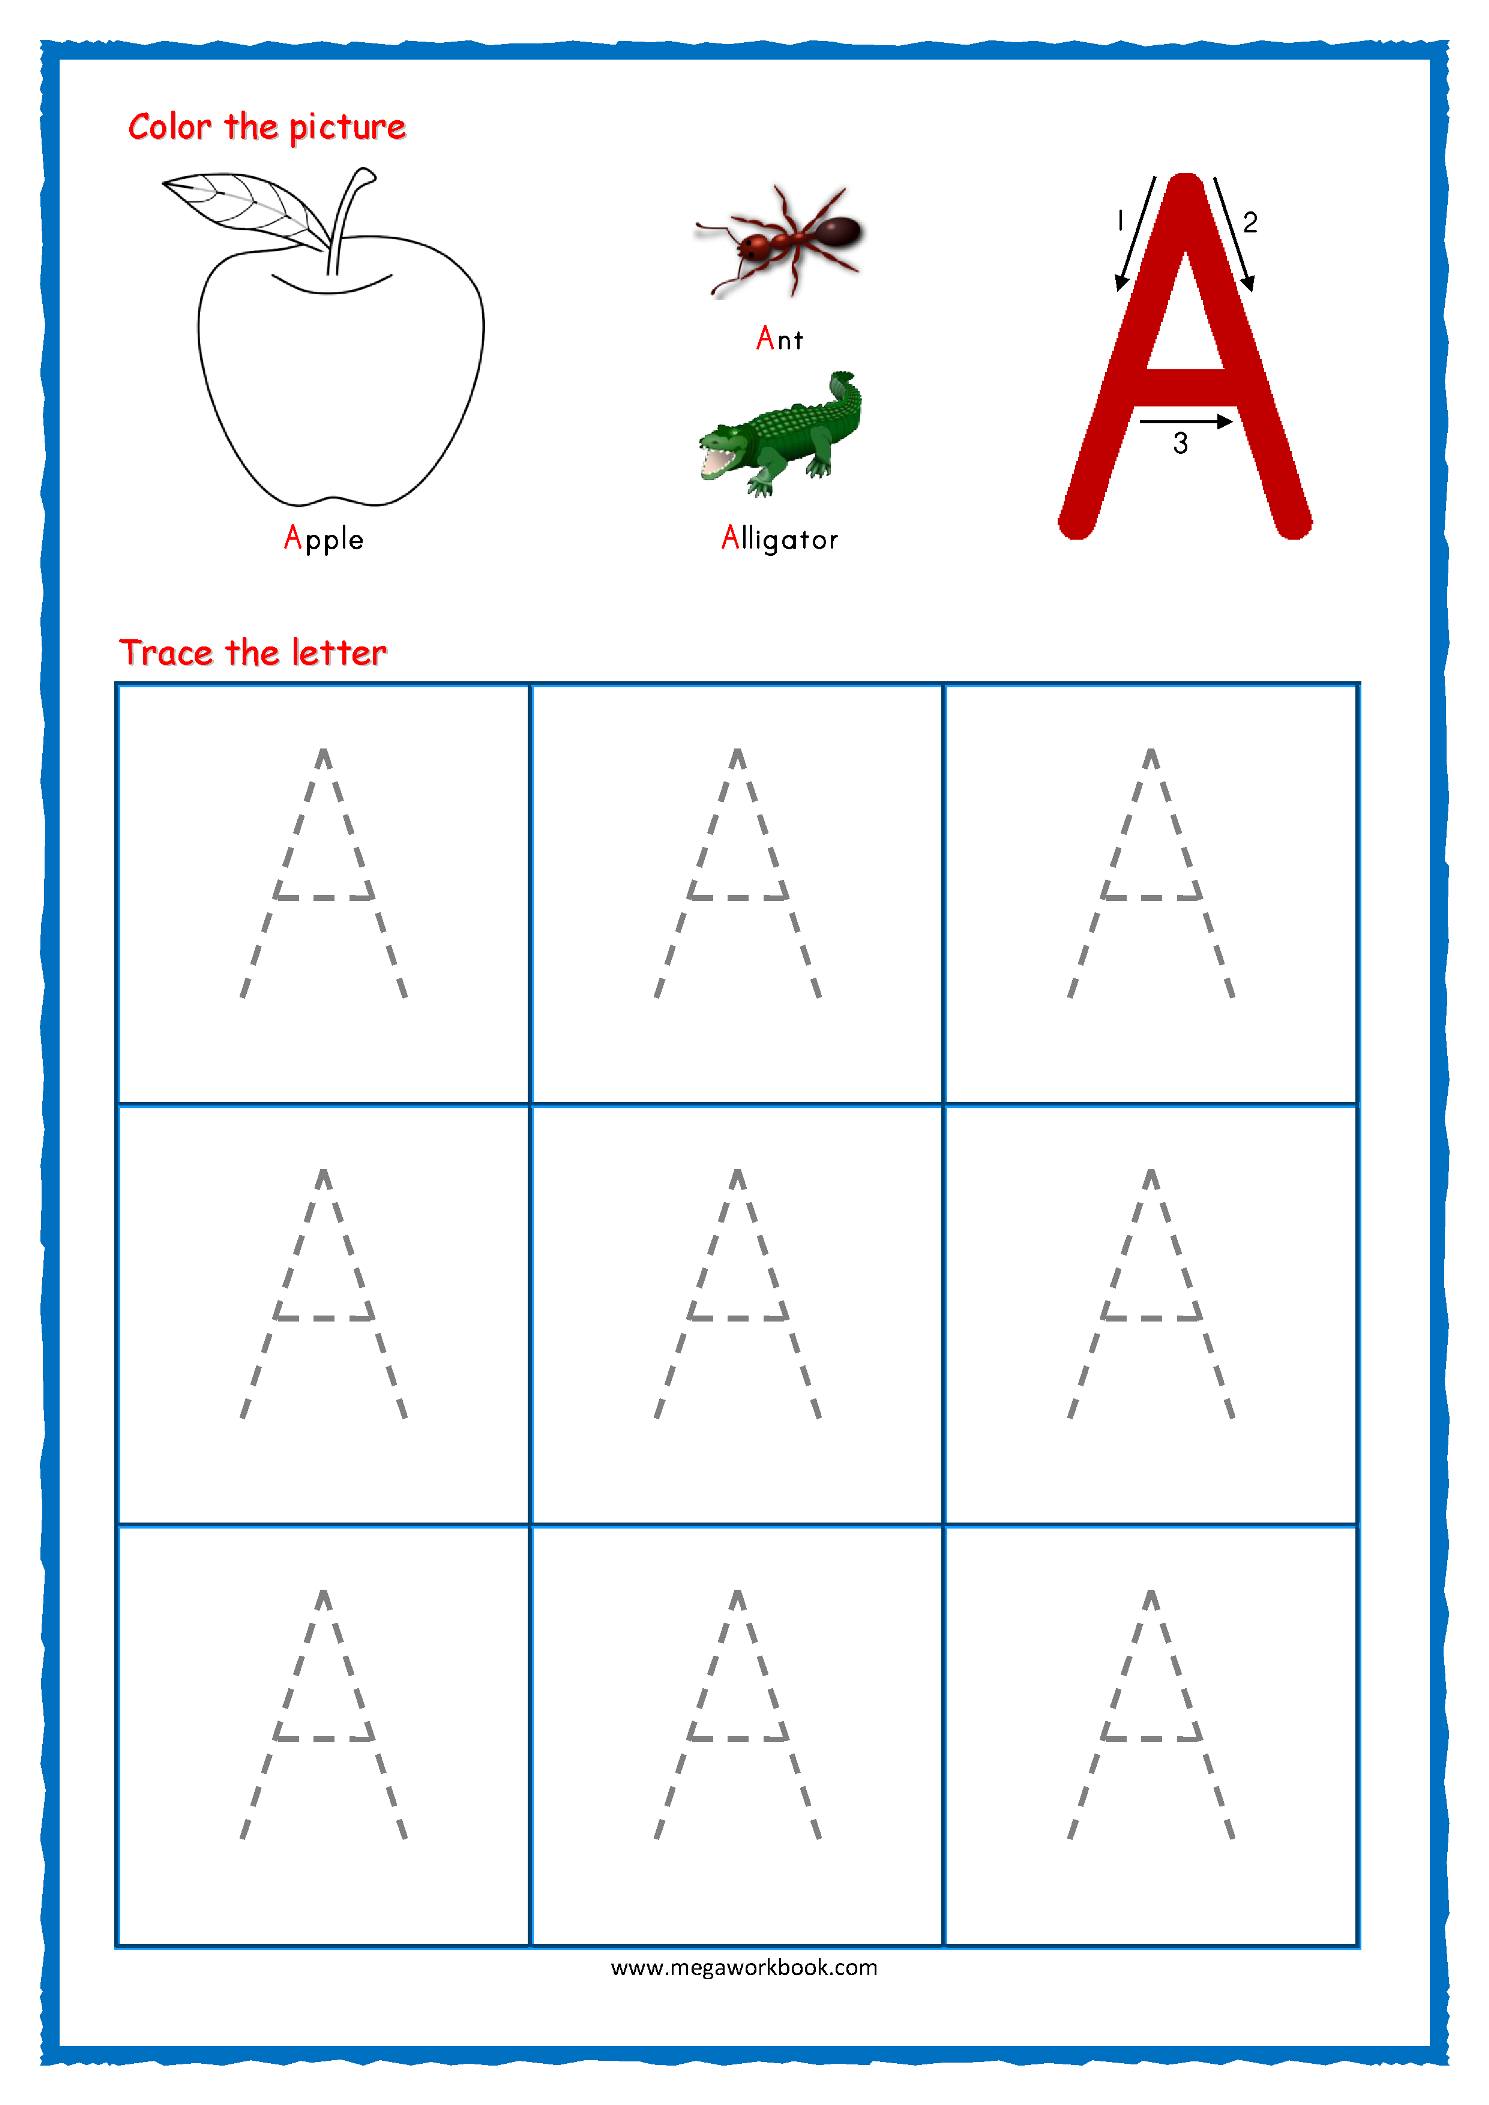 Tracing Letters - Alphabet Tracing - Capital Letters throughout Tracing Letters For Toddlers